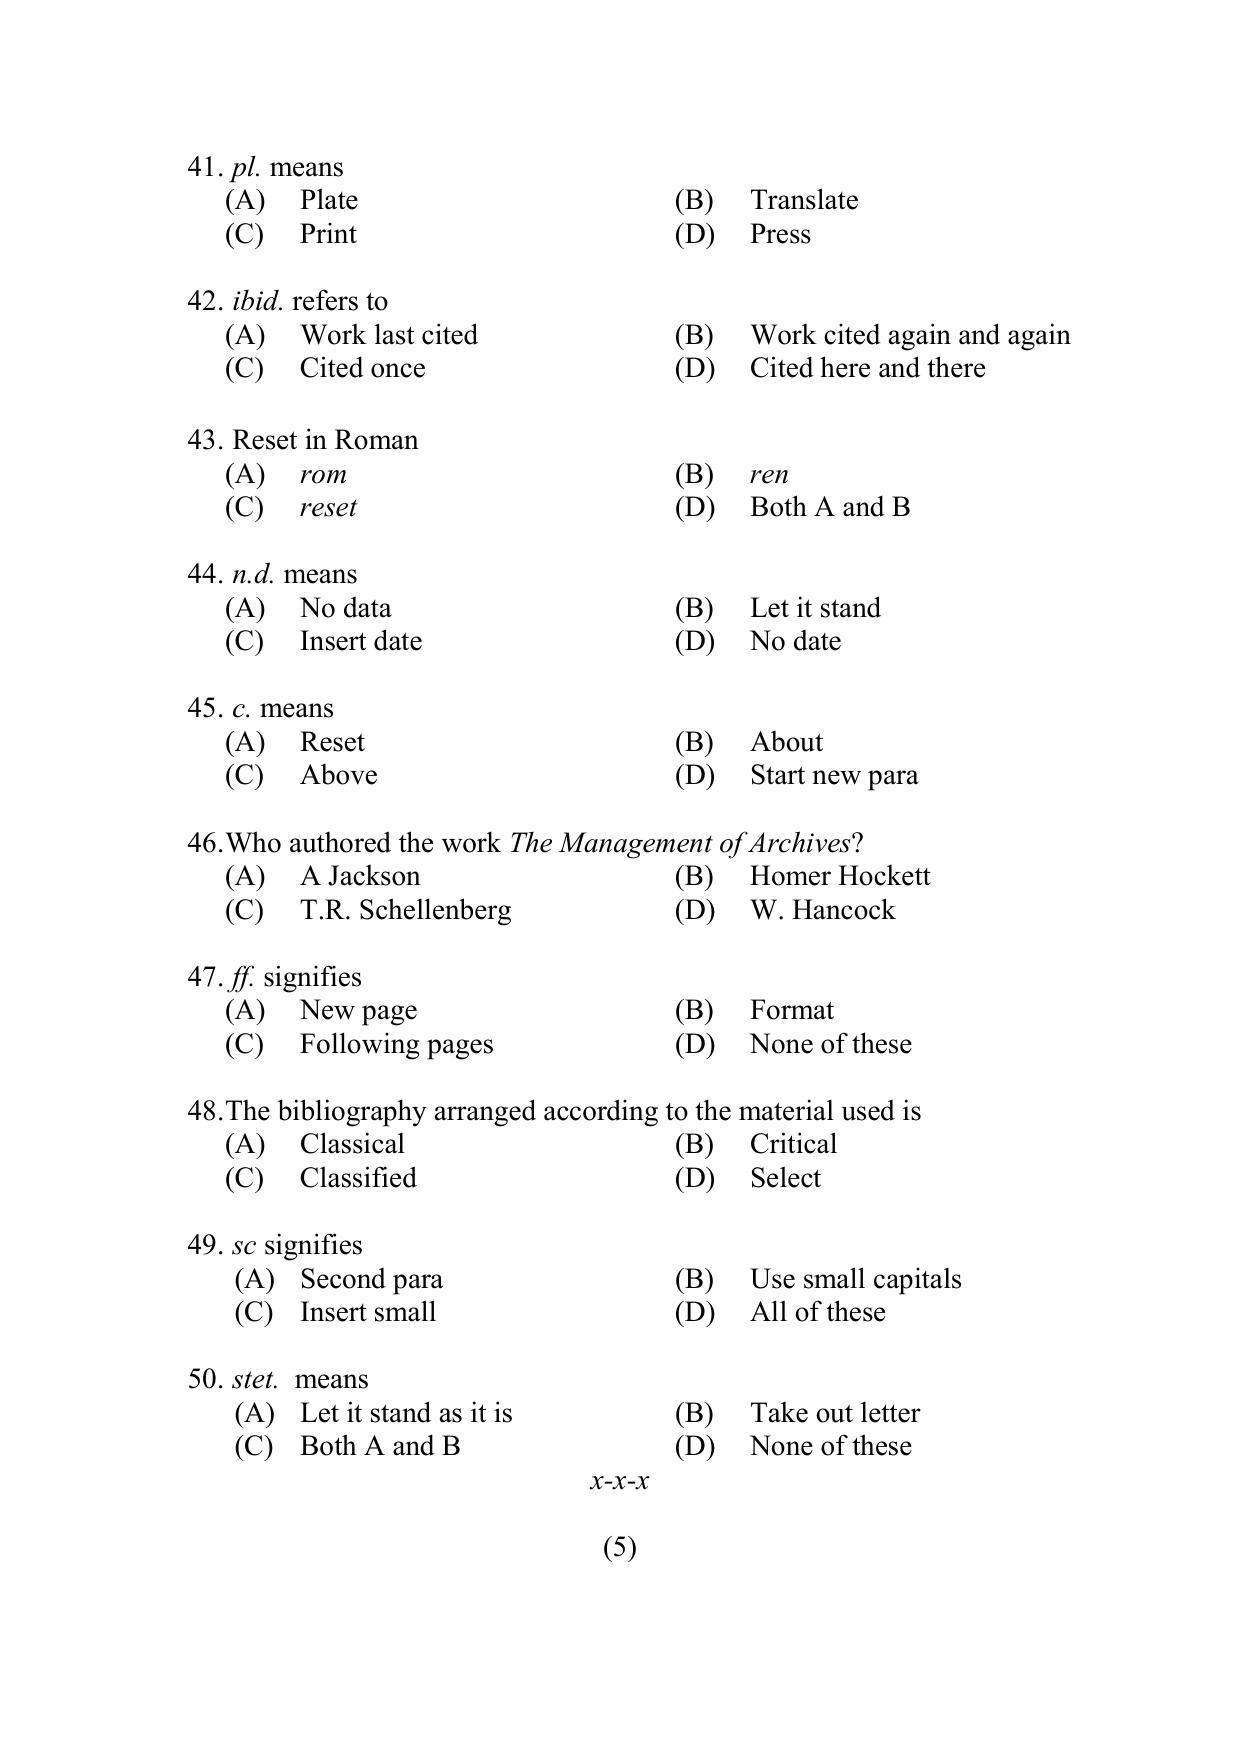 PU MPET Ancient Indian History & Archeology 2022 Question Papers - Page 5